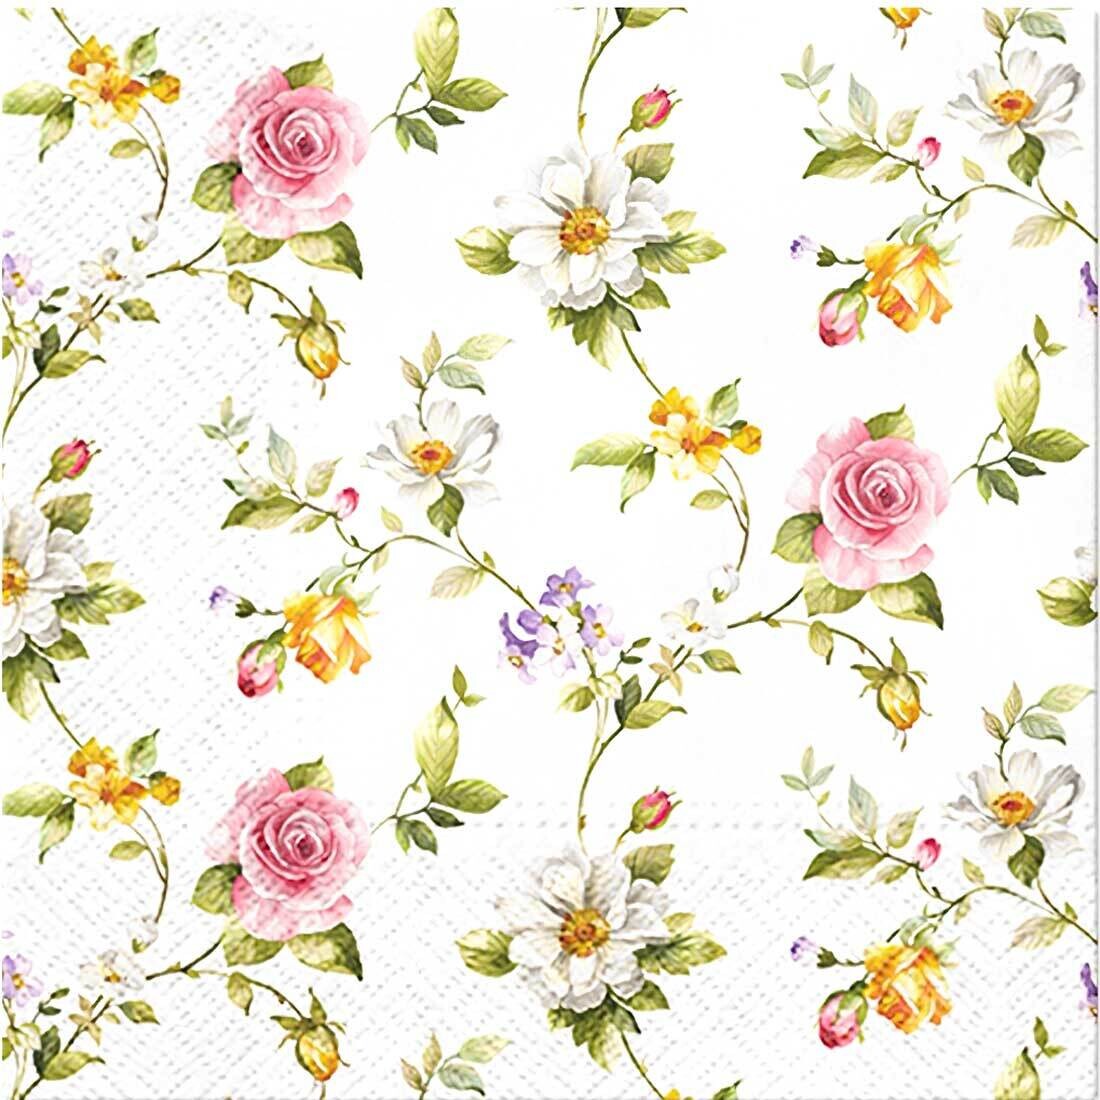 Decoupage Paper Napkins - Floral - Tender Roses (1 Sheet) Out of Stock